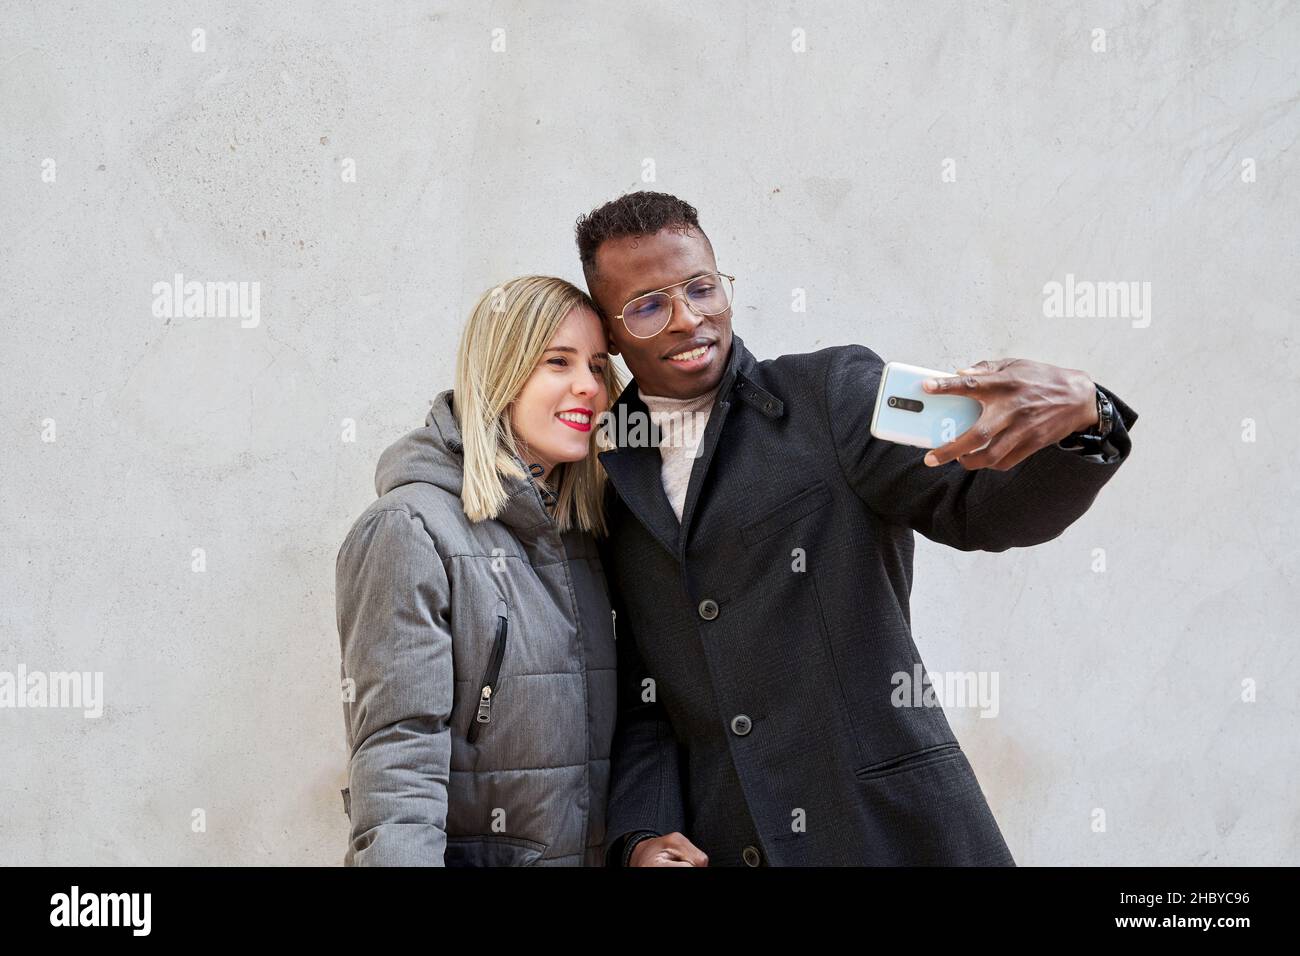 Diverse boyfriend and girlfriend in outerwear smiling and taking selfie against gray wall during date on city street Stock Photo